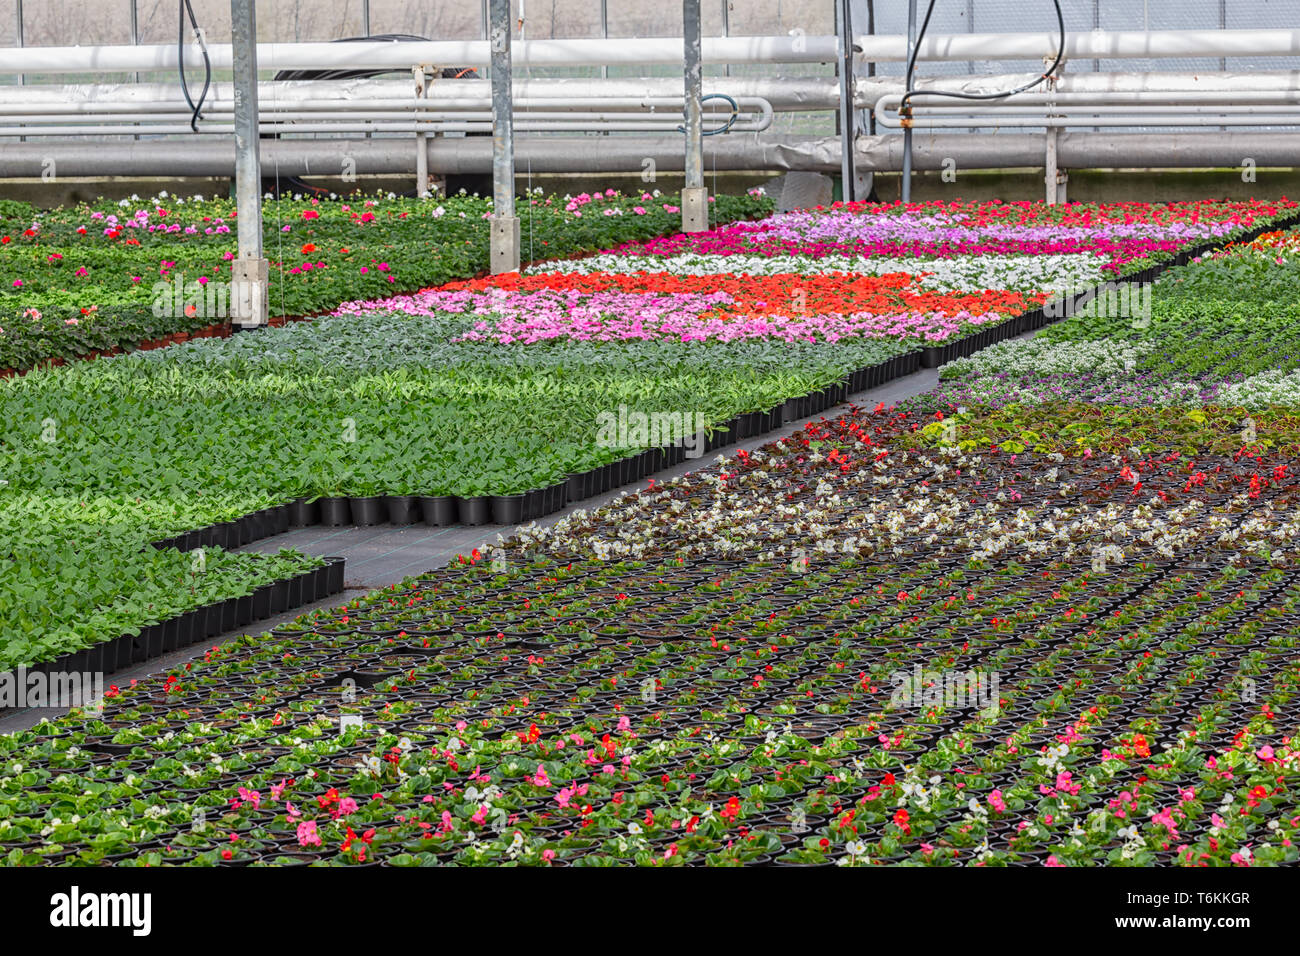 Dutch glasshouse with cultivation of colorful begonia and violet flowers Stock Photo